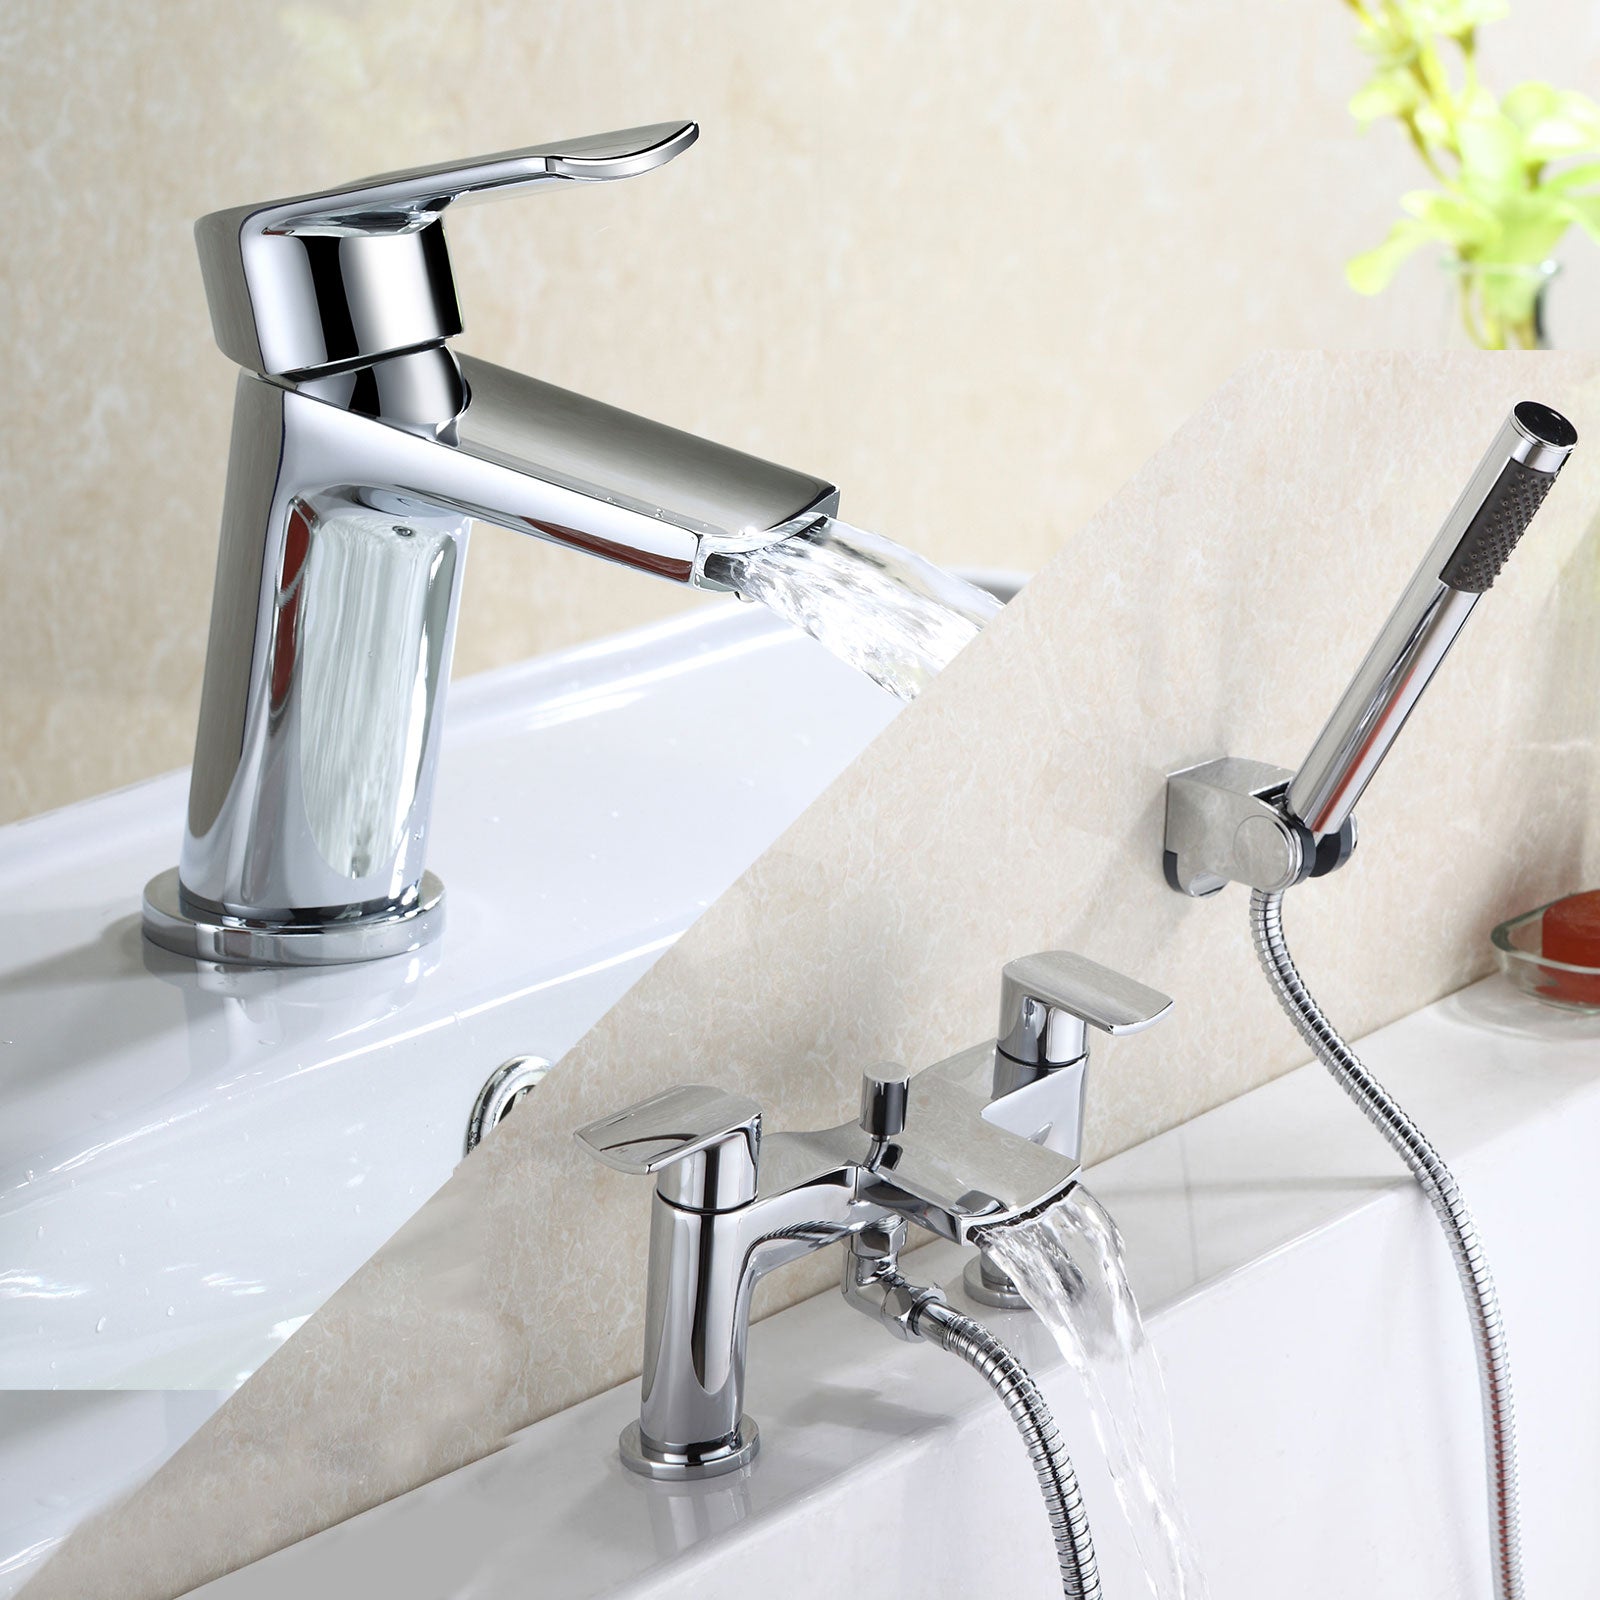 Centa Contemporary Set Of Bathroom Sink Mixer Tap And Bath Shower Mixer Tap + Free Basin Waste